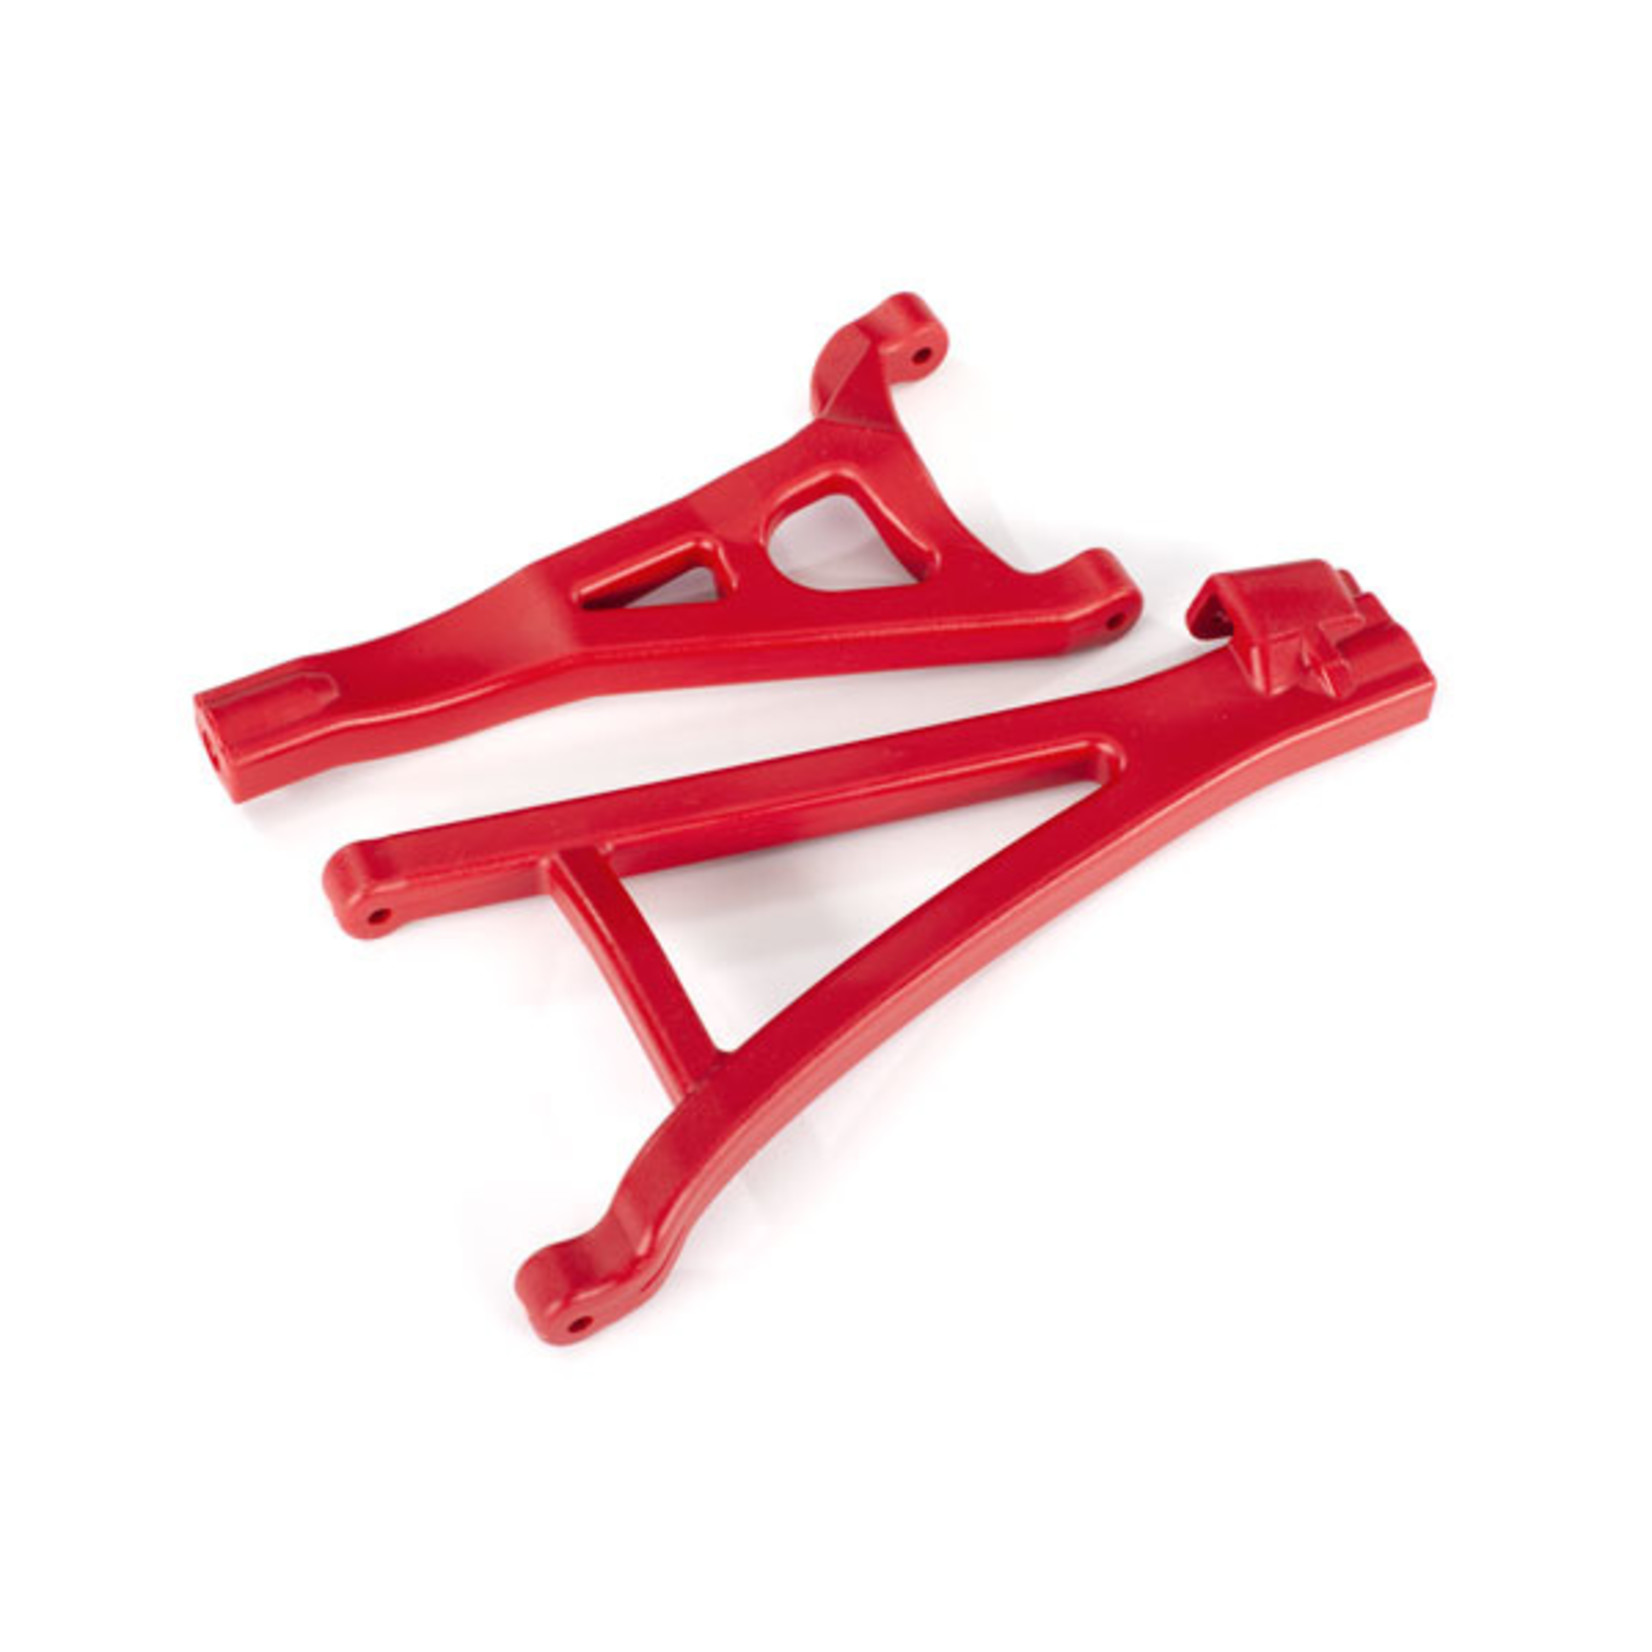 Traxxas 8632R - Suspension arms, red, front (left), heavy